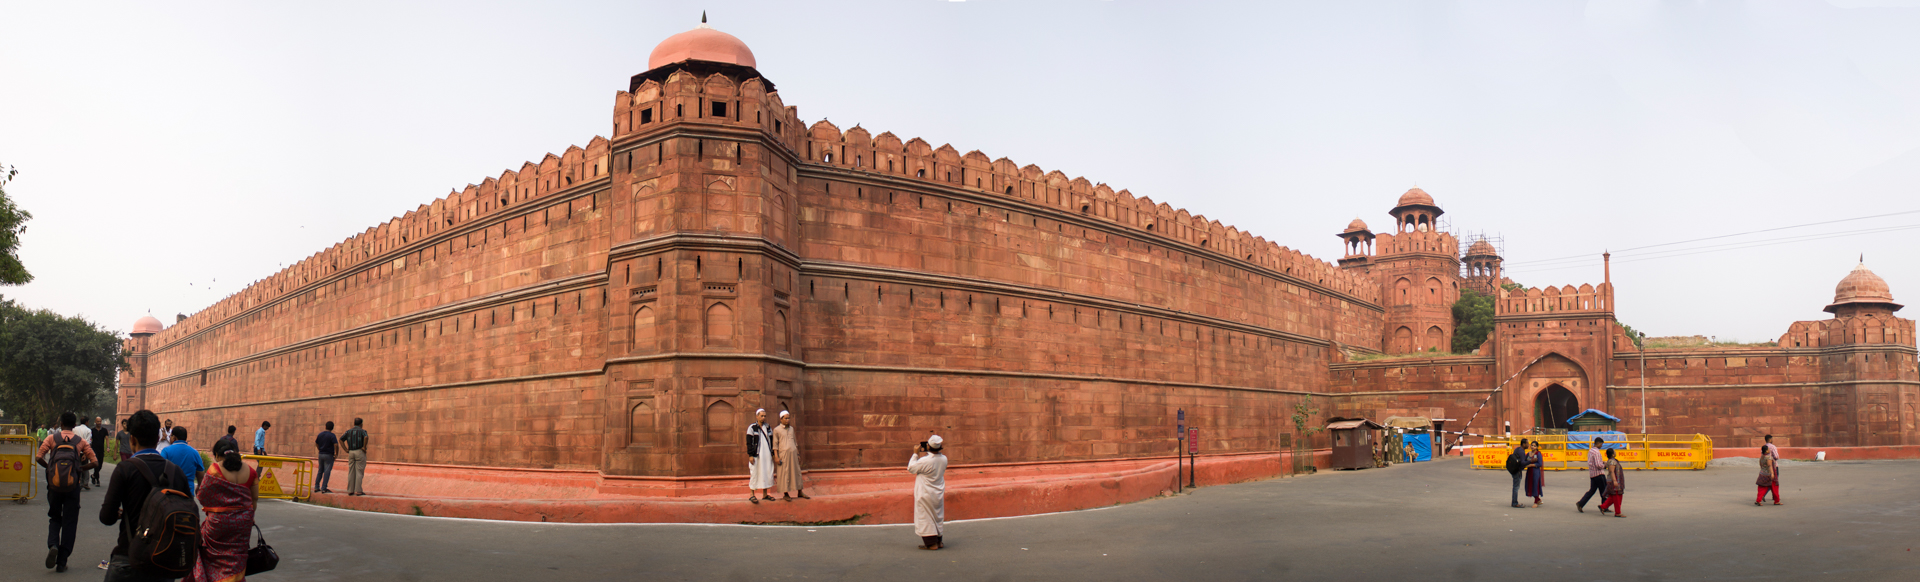 Red Fort Wide (1 of 1).jpg